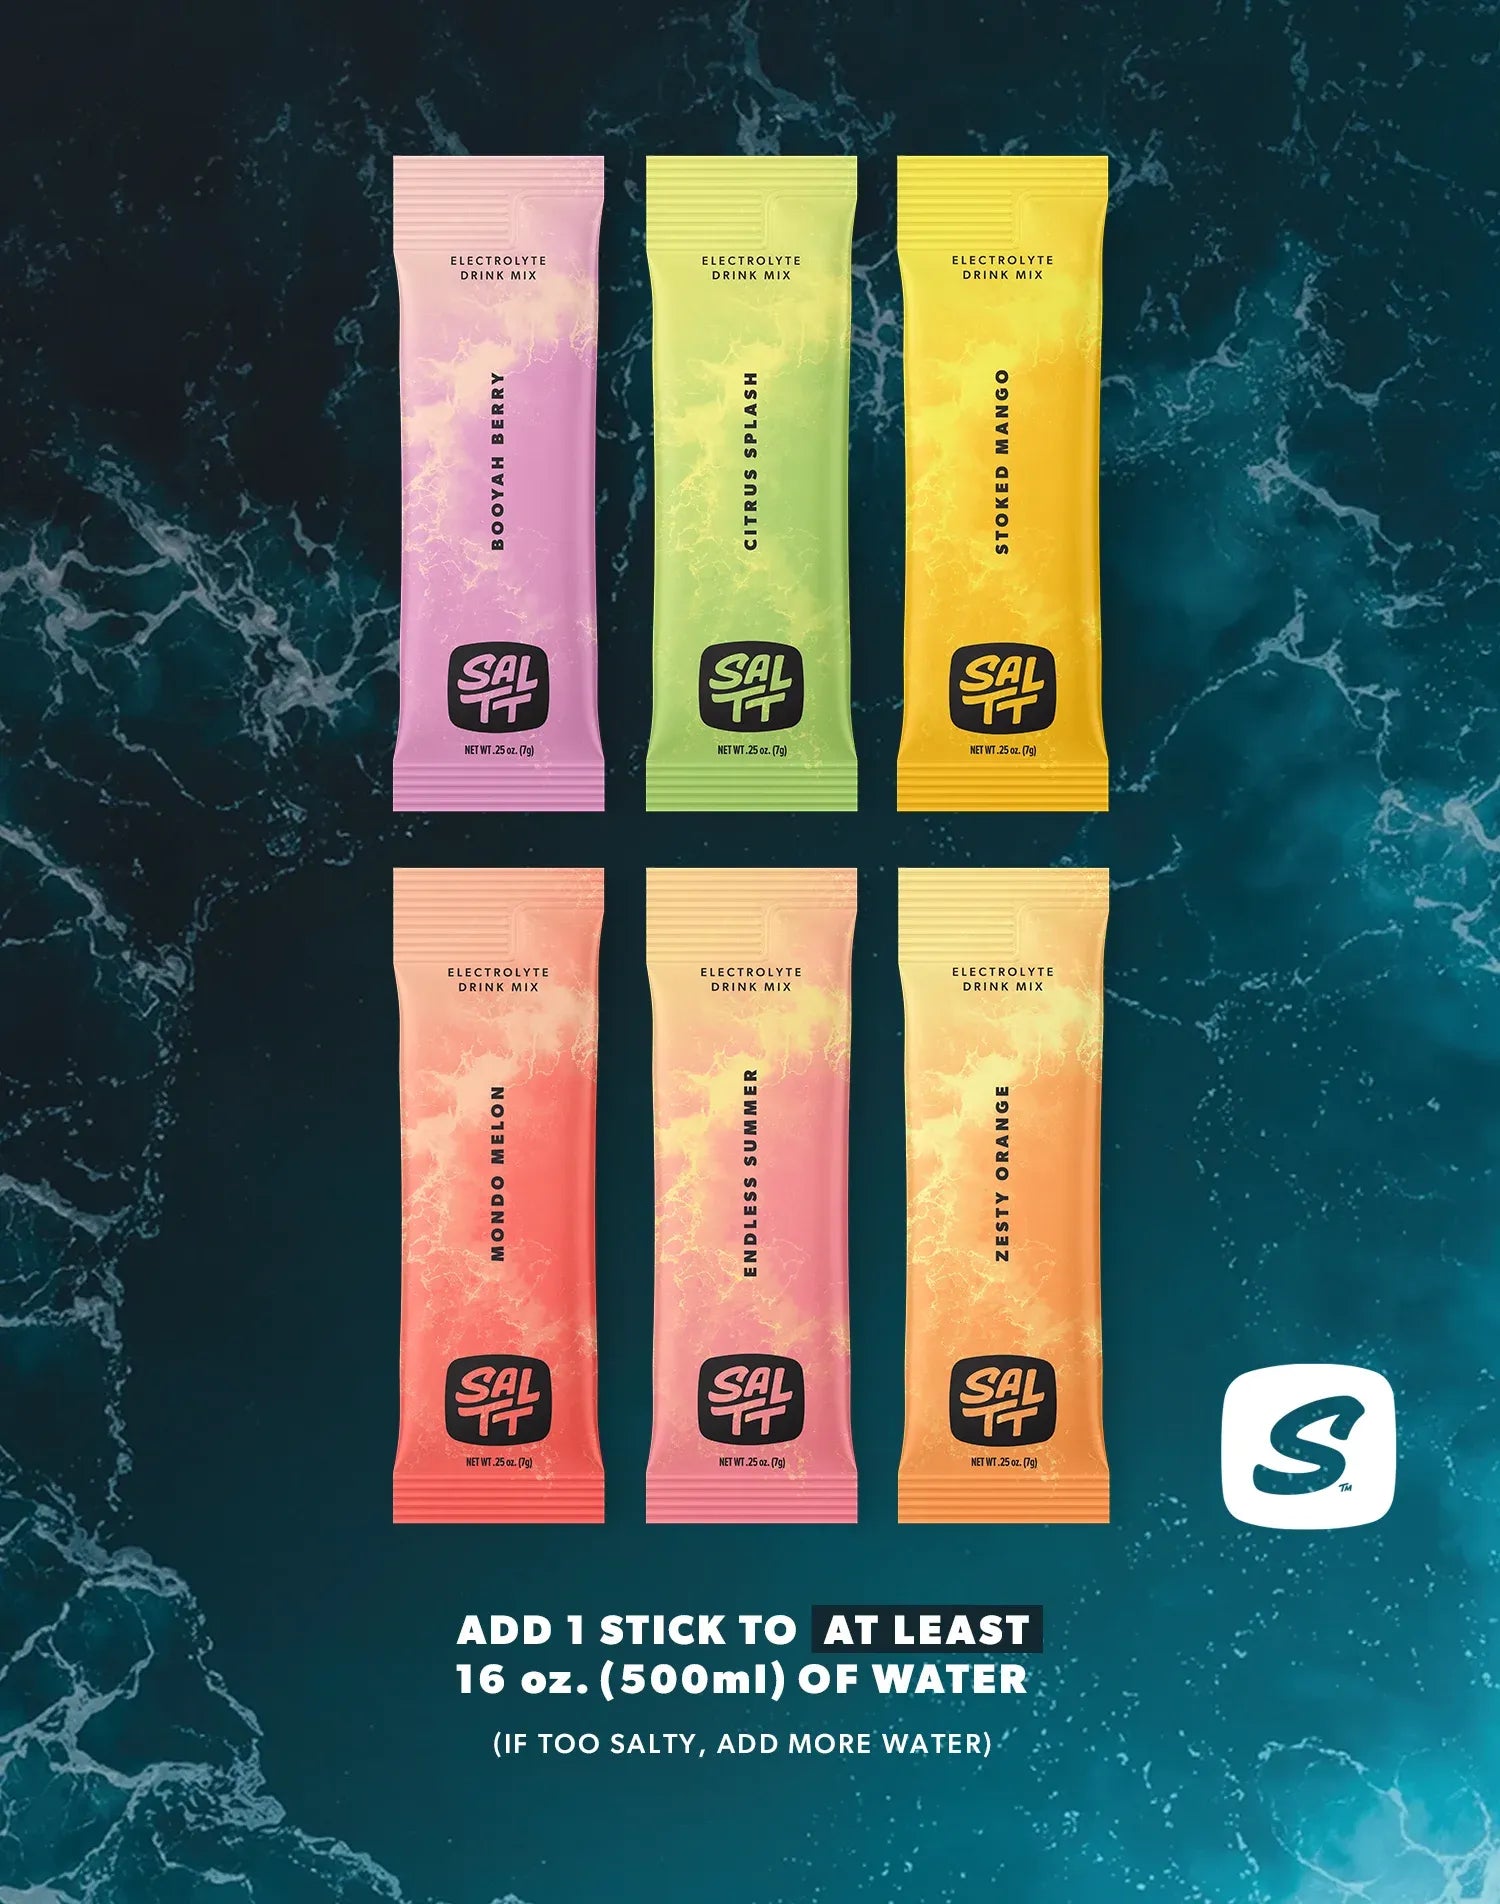 30 stick All Things Fruit Variety Pack. 5 Booyah Berry, 5 Citrus Splash, 5 Stoked Mango, 5 Mondo Melon, 5 Endless Summer, 5 Zesty Orange. Add 1 stick to at least 16 oz. of water. If too salty, add more water.